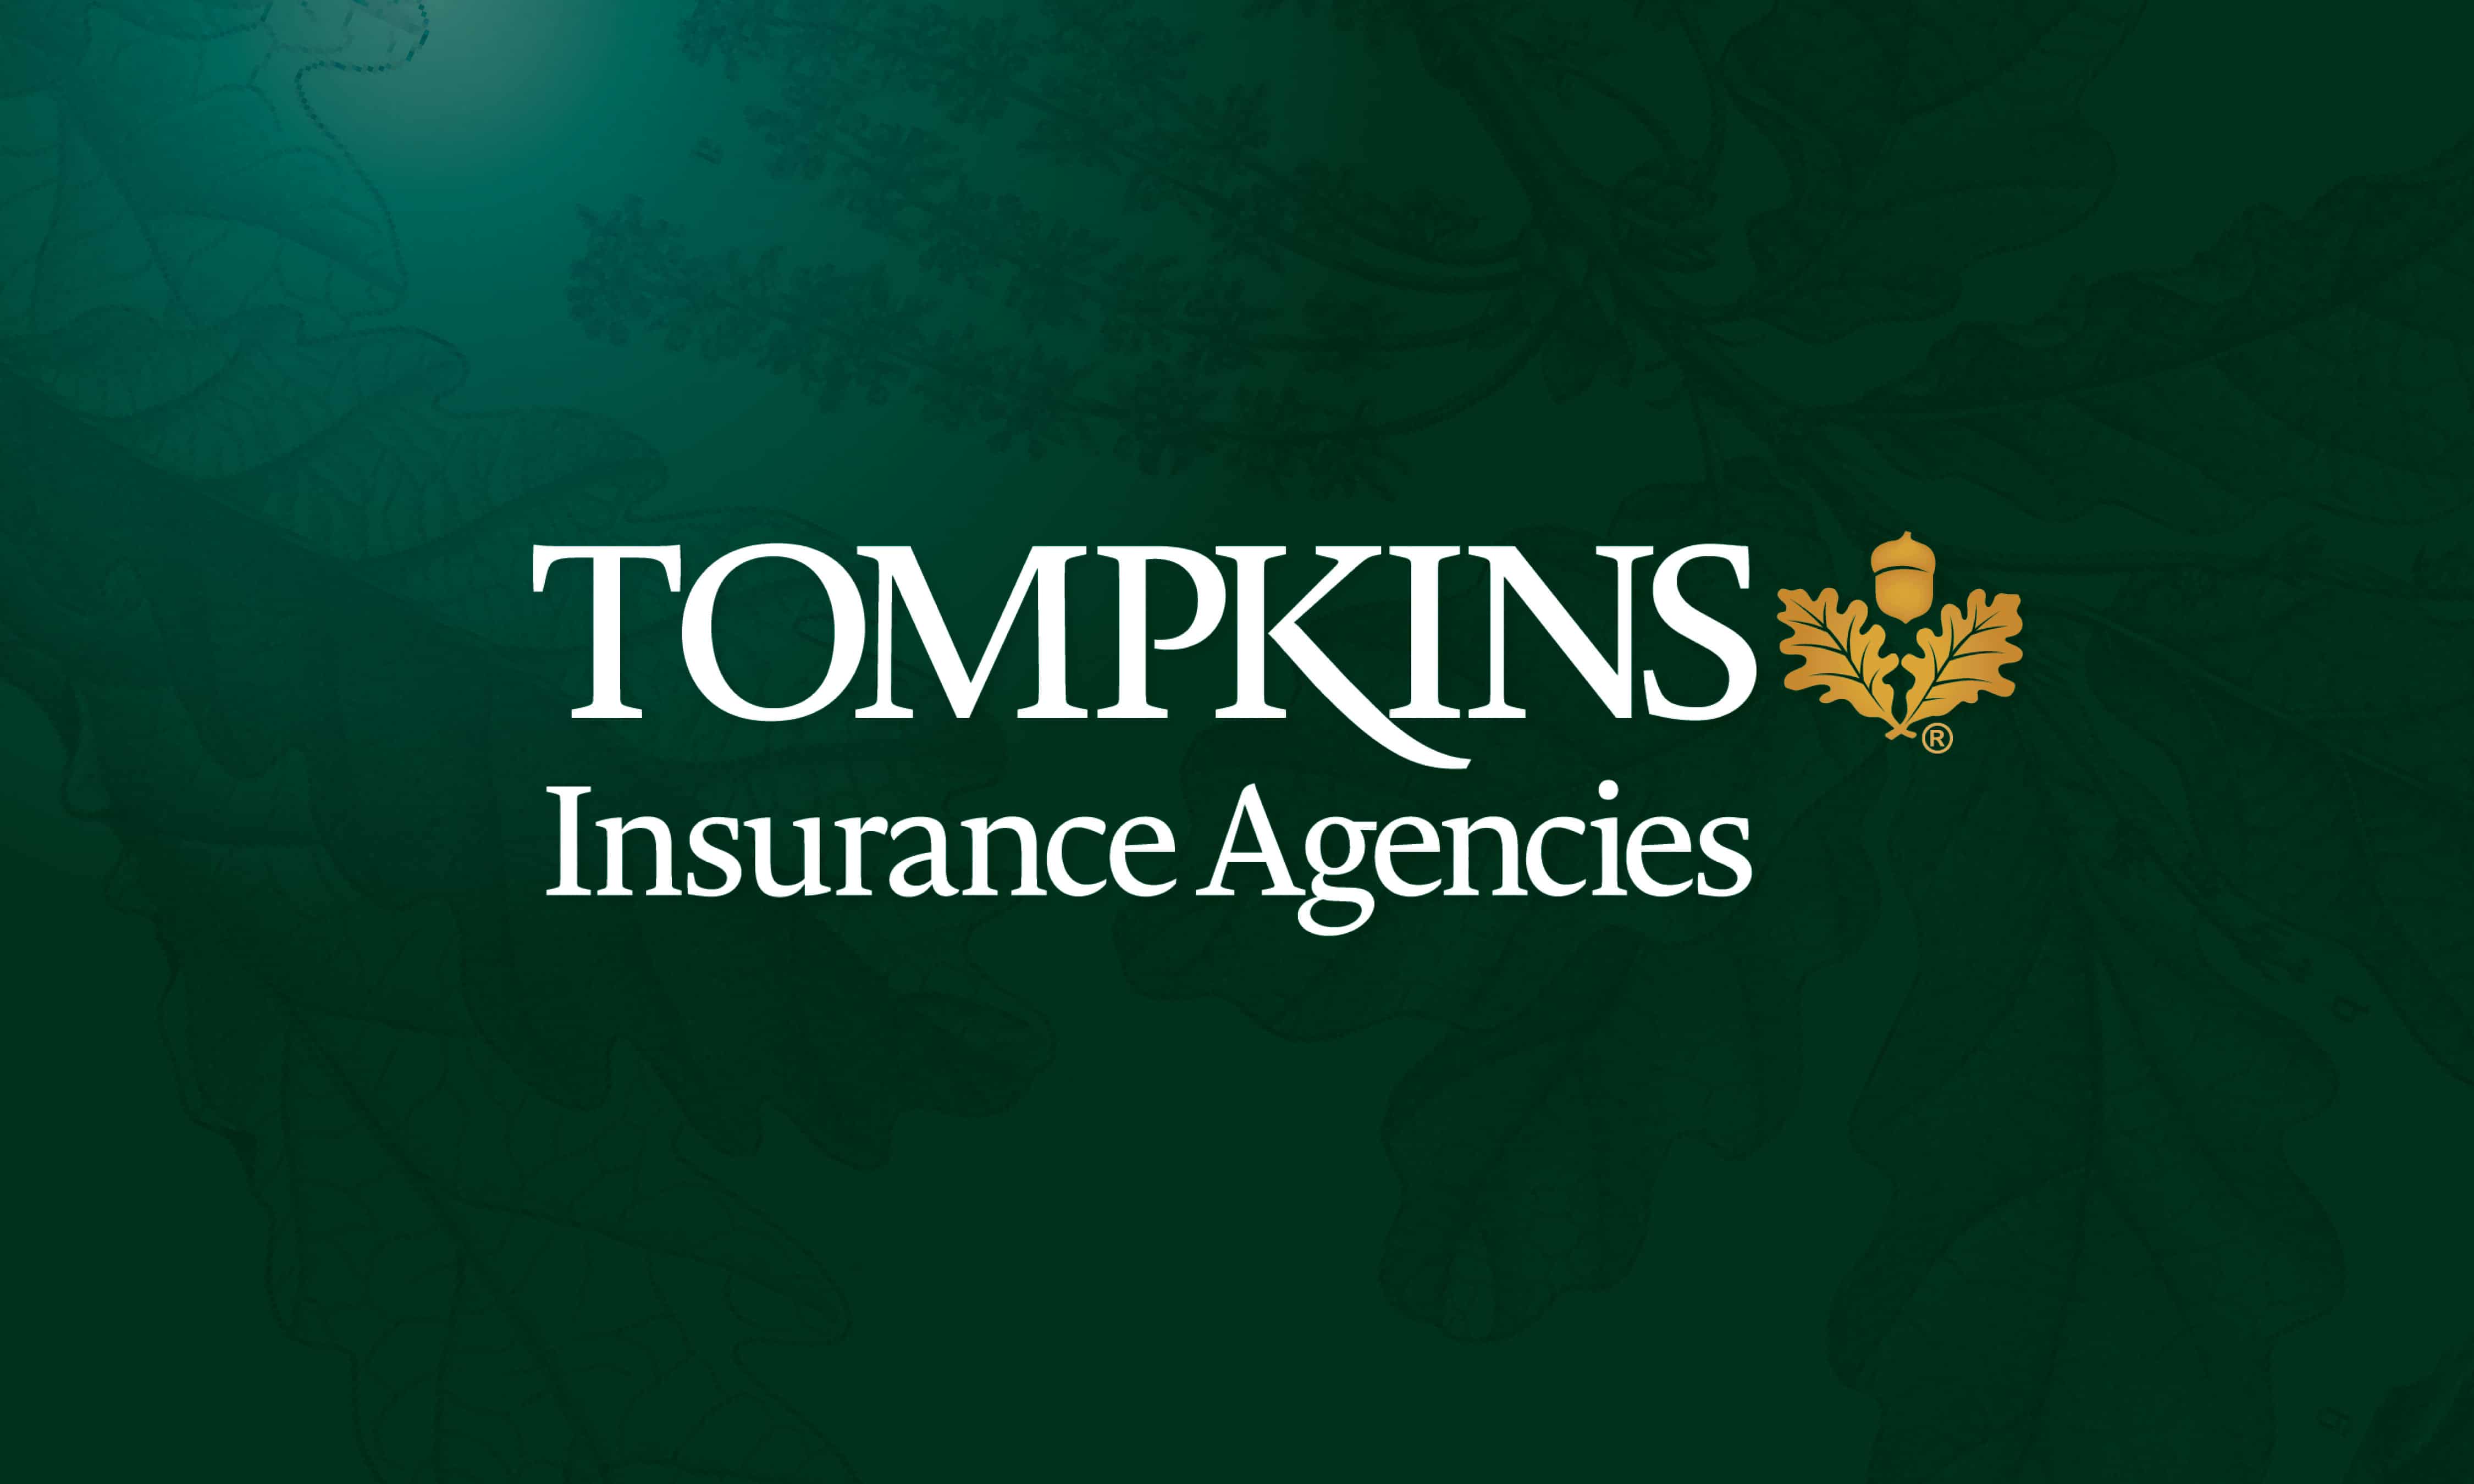 Tompkins Insurance Appoints Shannon Kleinsmith as Commercial Insurance Account Manager in Wyomissing